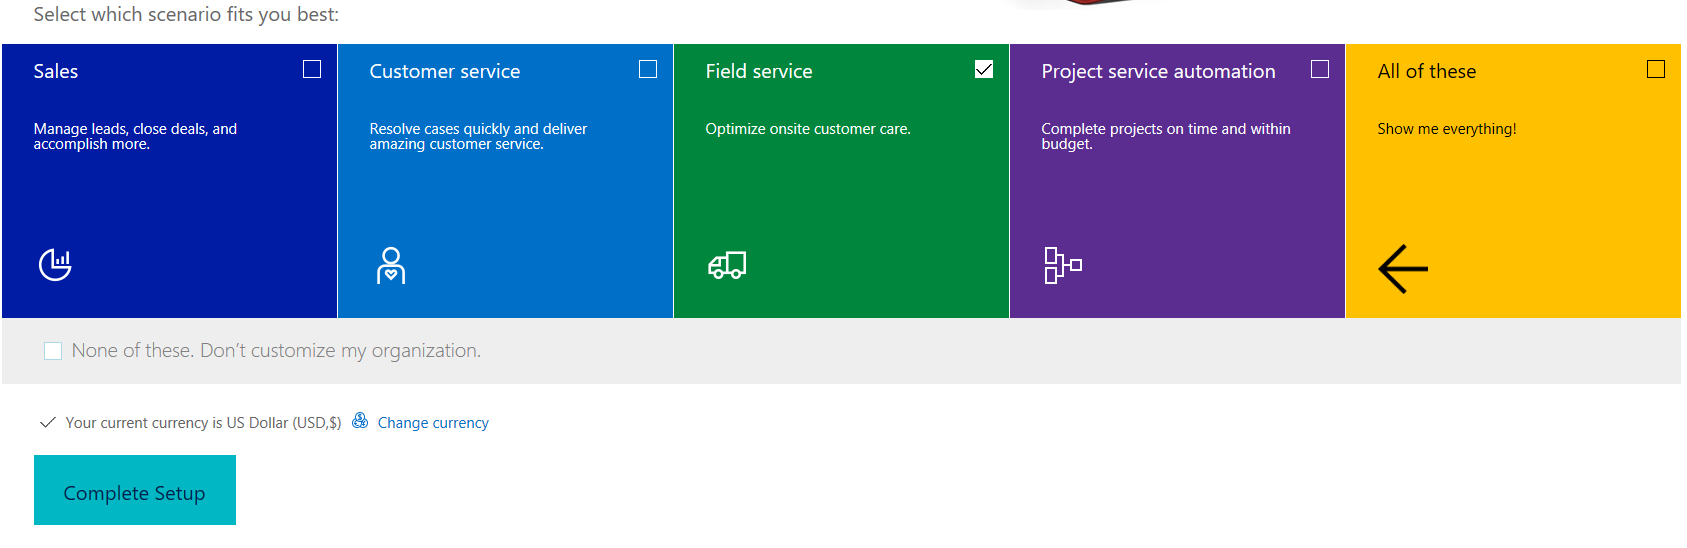 Screenshot of Sales, Customer service, Field service, Project service automation and All of these options to complete setup.